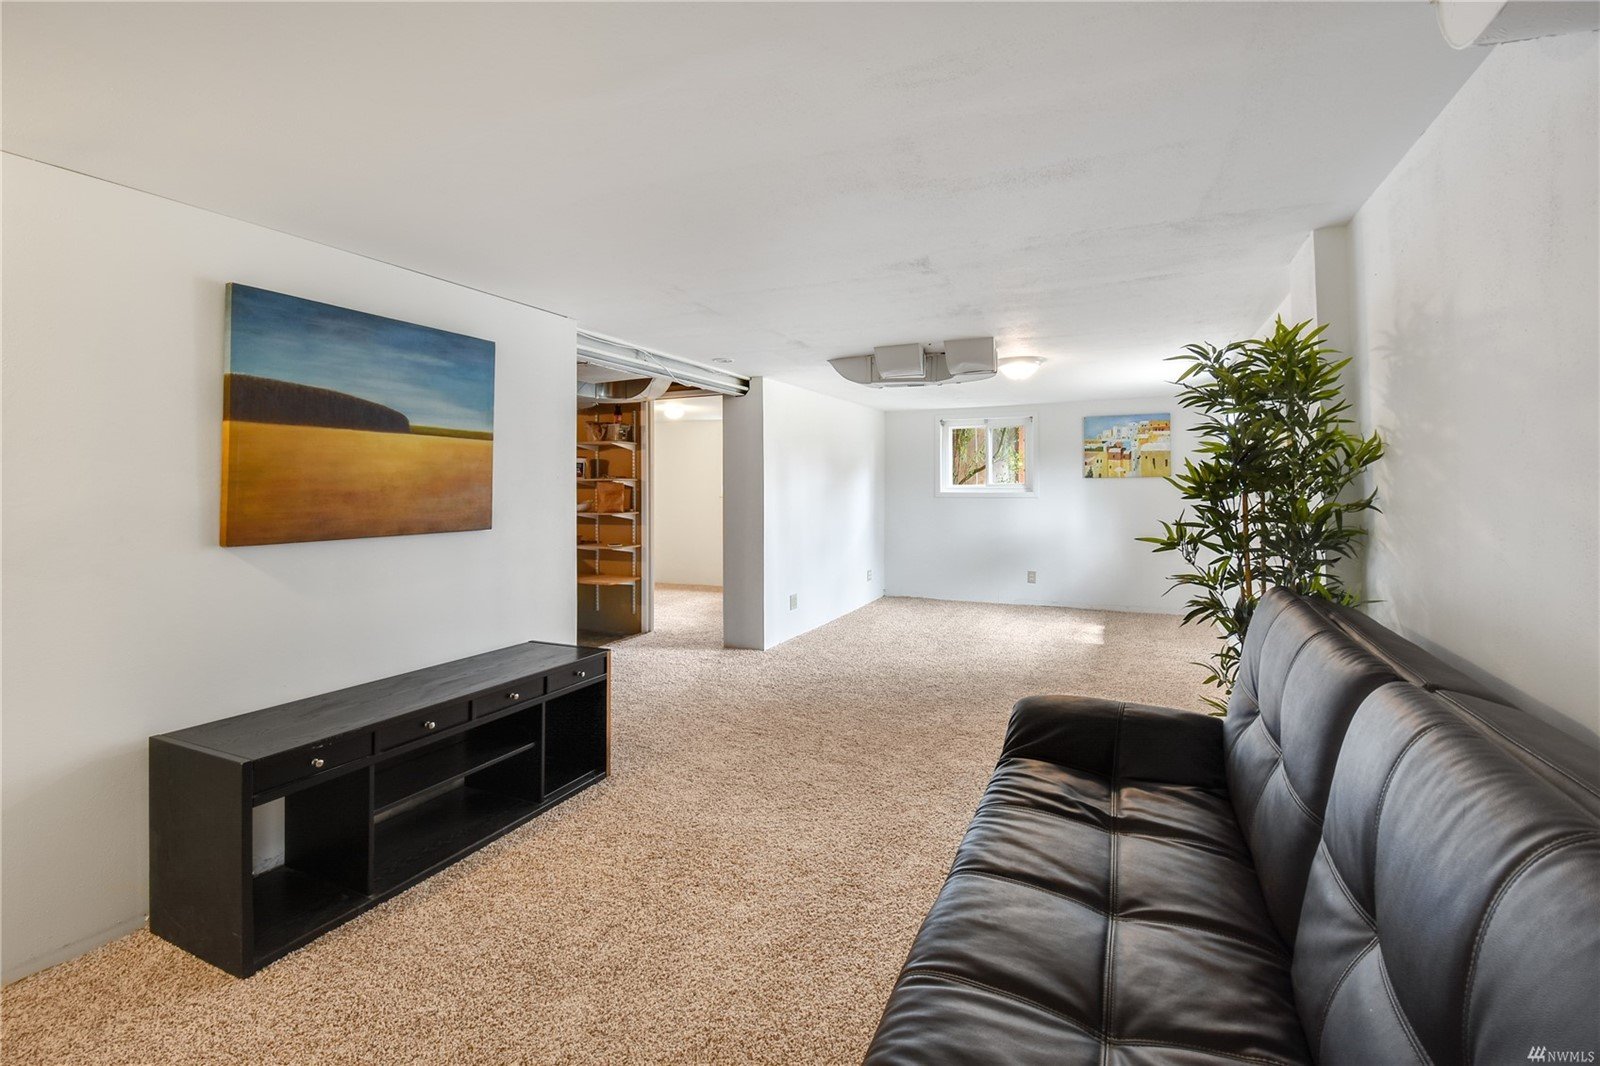 The family room of the Westwood Village rambler